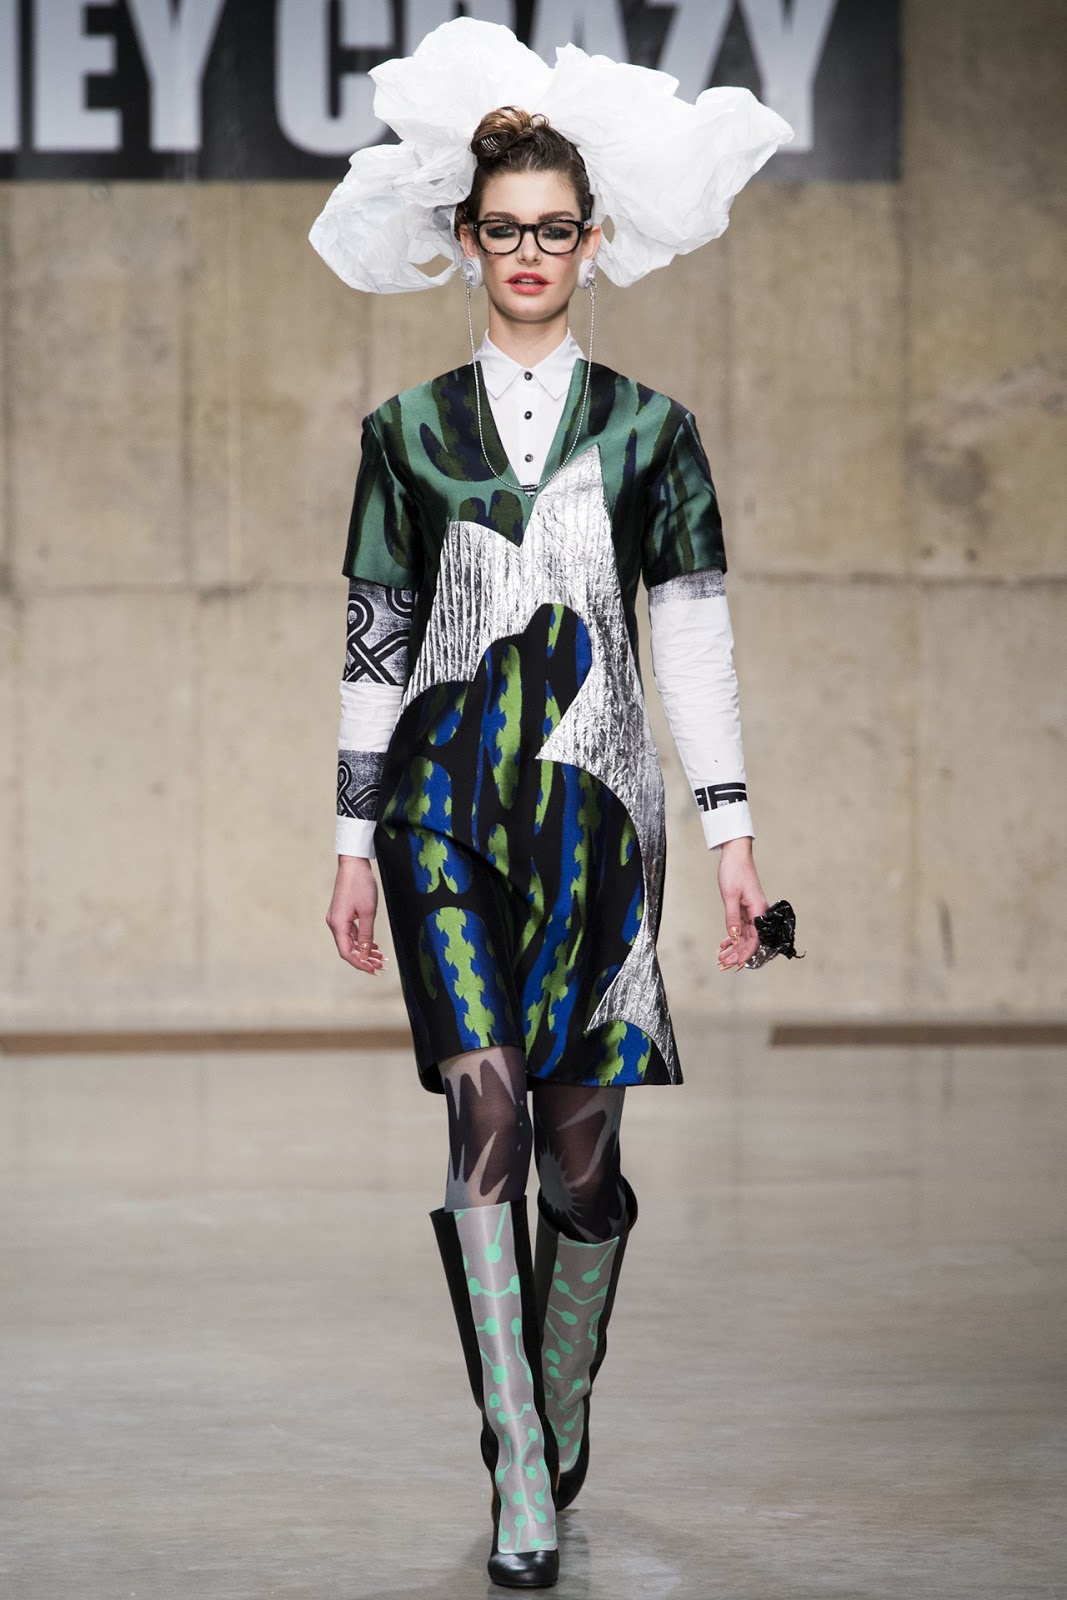 I Smell a Hat: Hats on the Catwalk of London Fashion Week AW13